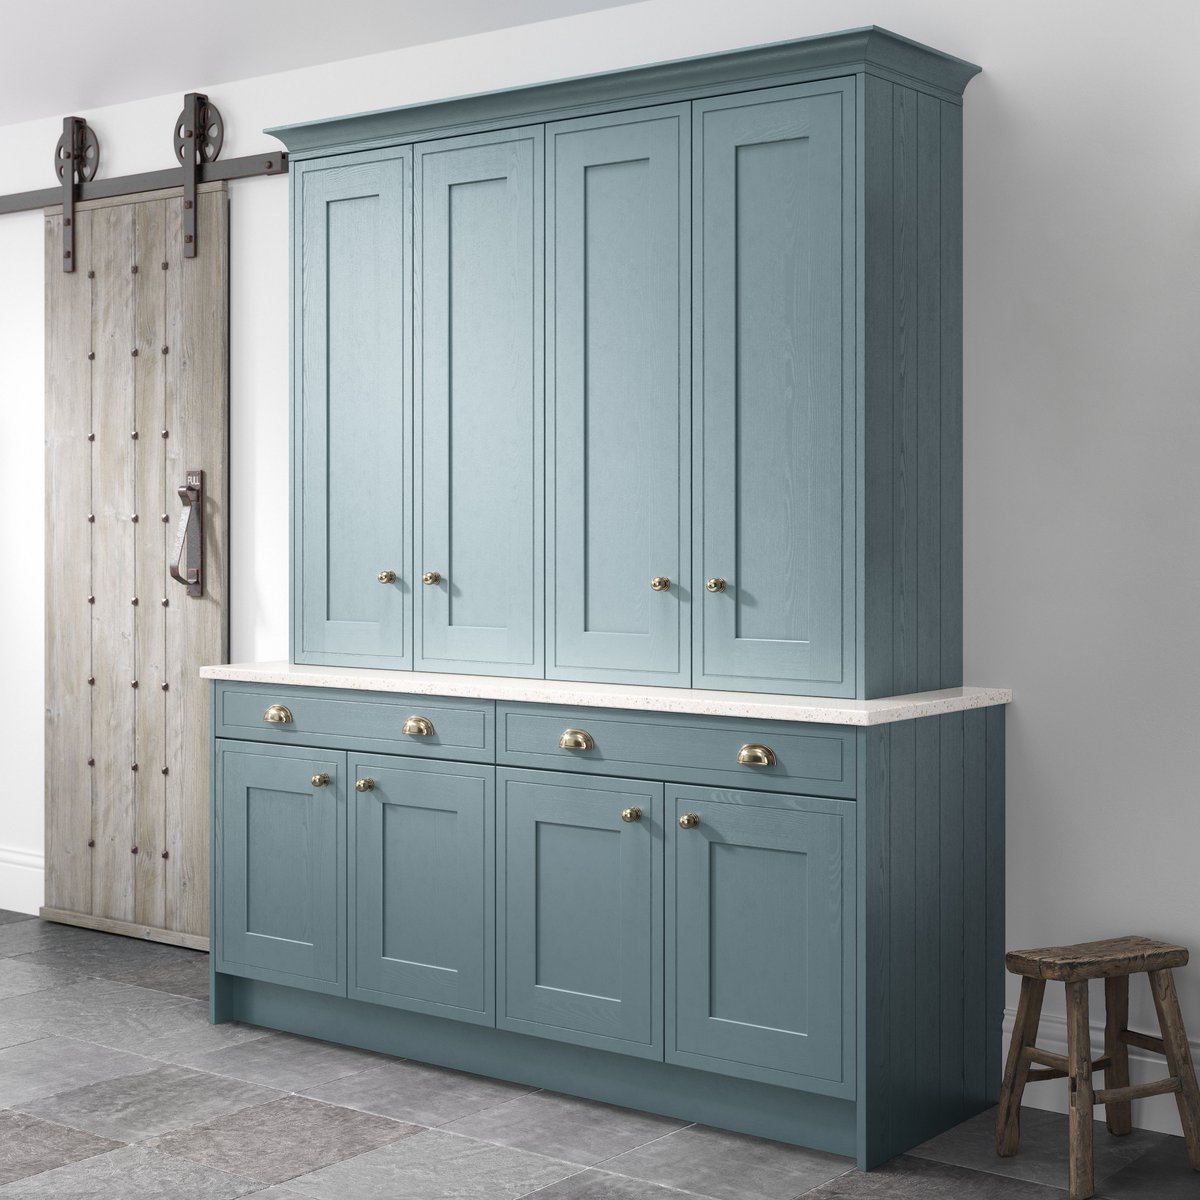 A look into the Chartwell dresser in our new painted colour, Baltic Green featuring the elegant English Bronze Cup handles and knobs. Such fine yet simple handles are a beautiful touch to your kitchen cabinetry. #Chartwell #classickitchens #burbidge #simpletouches